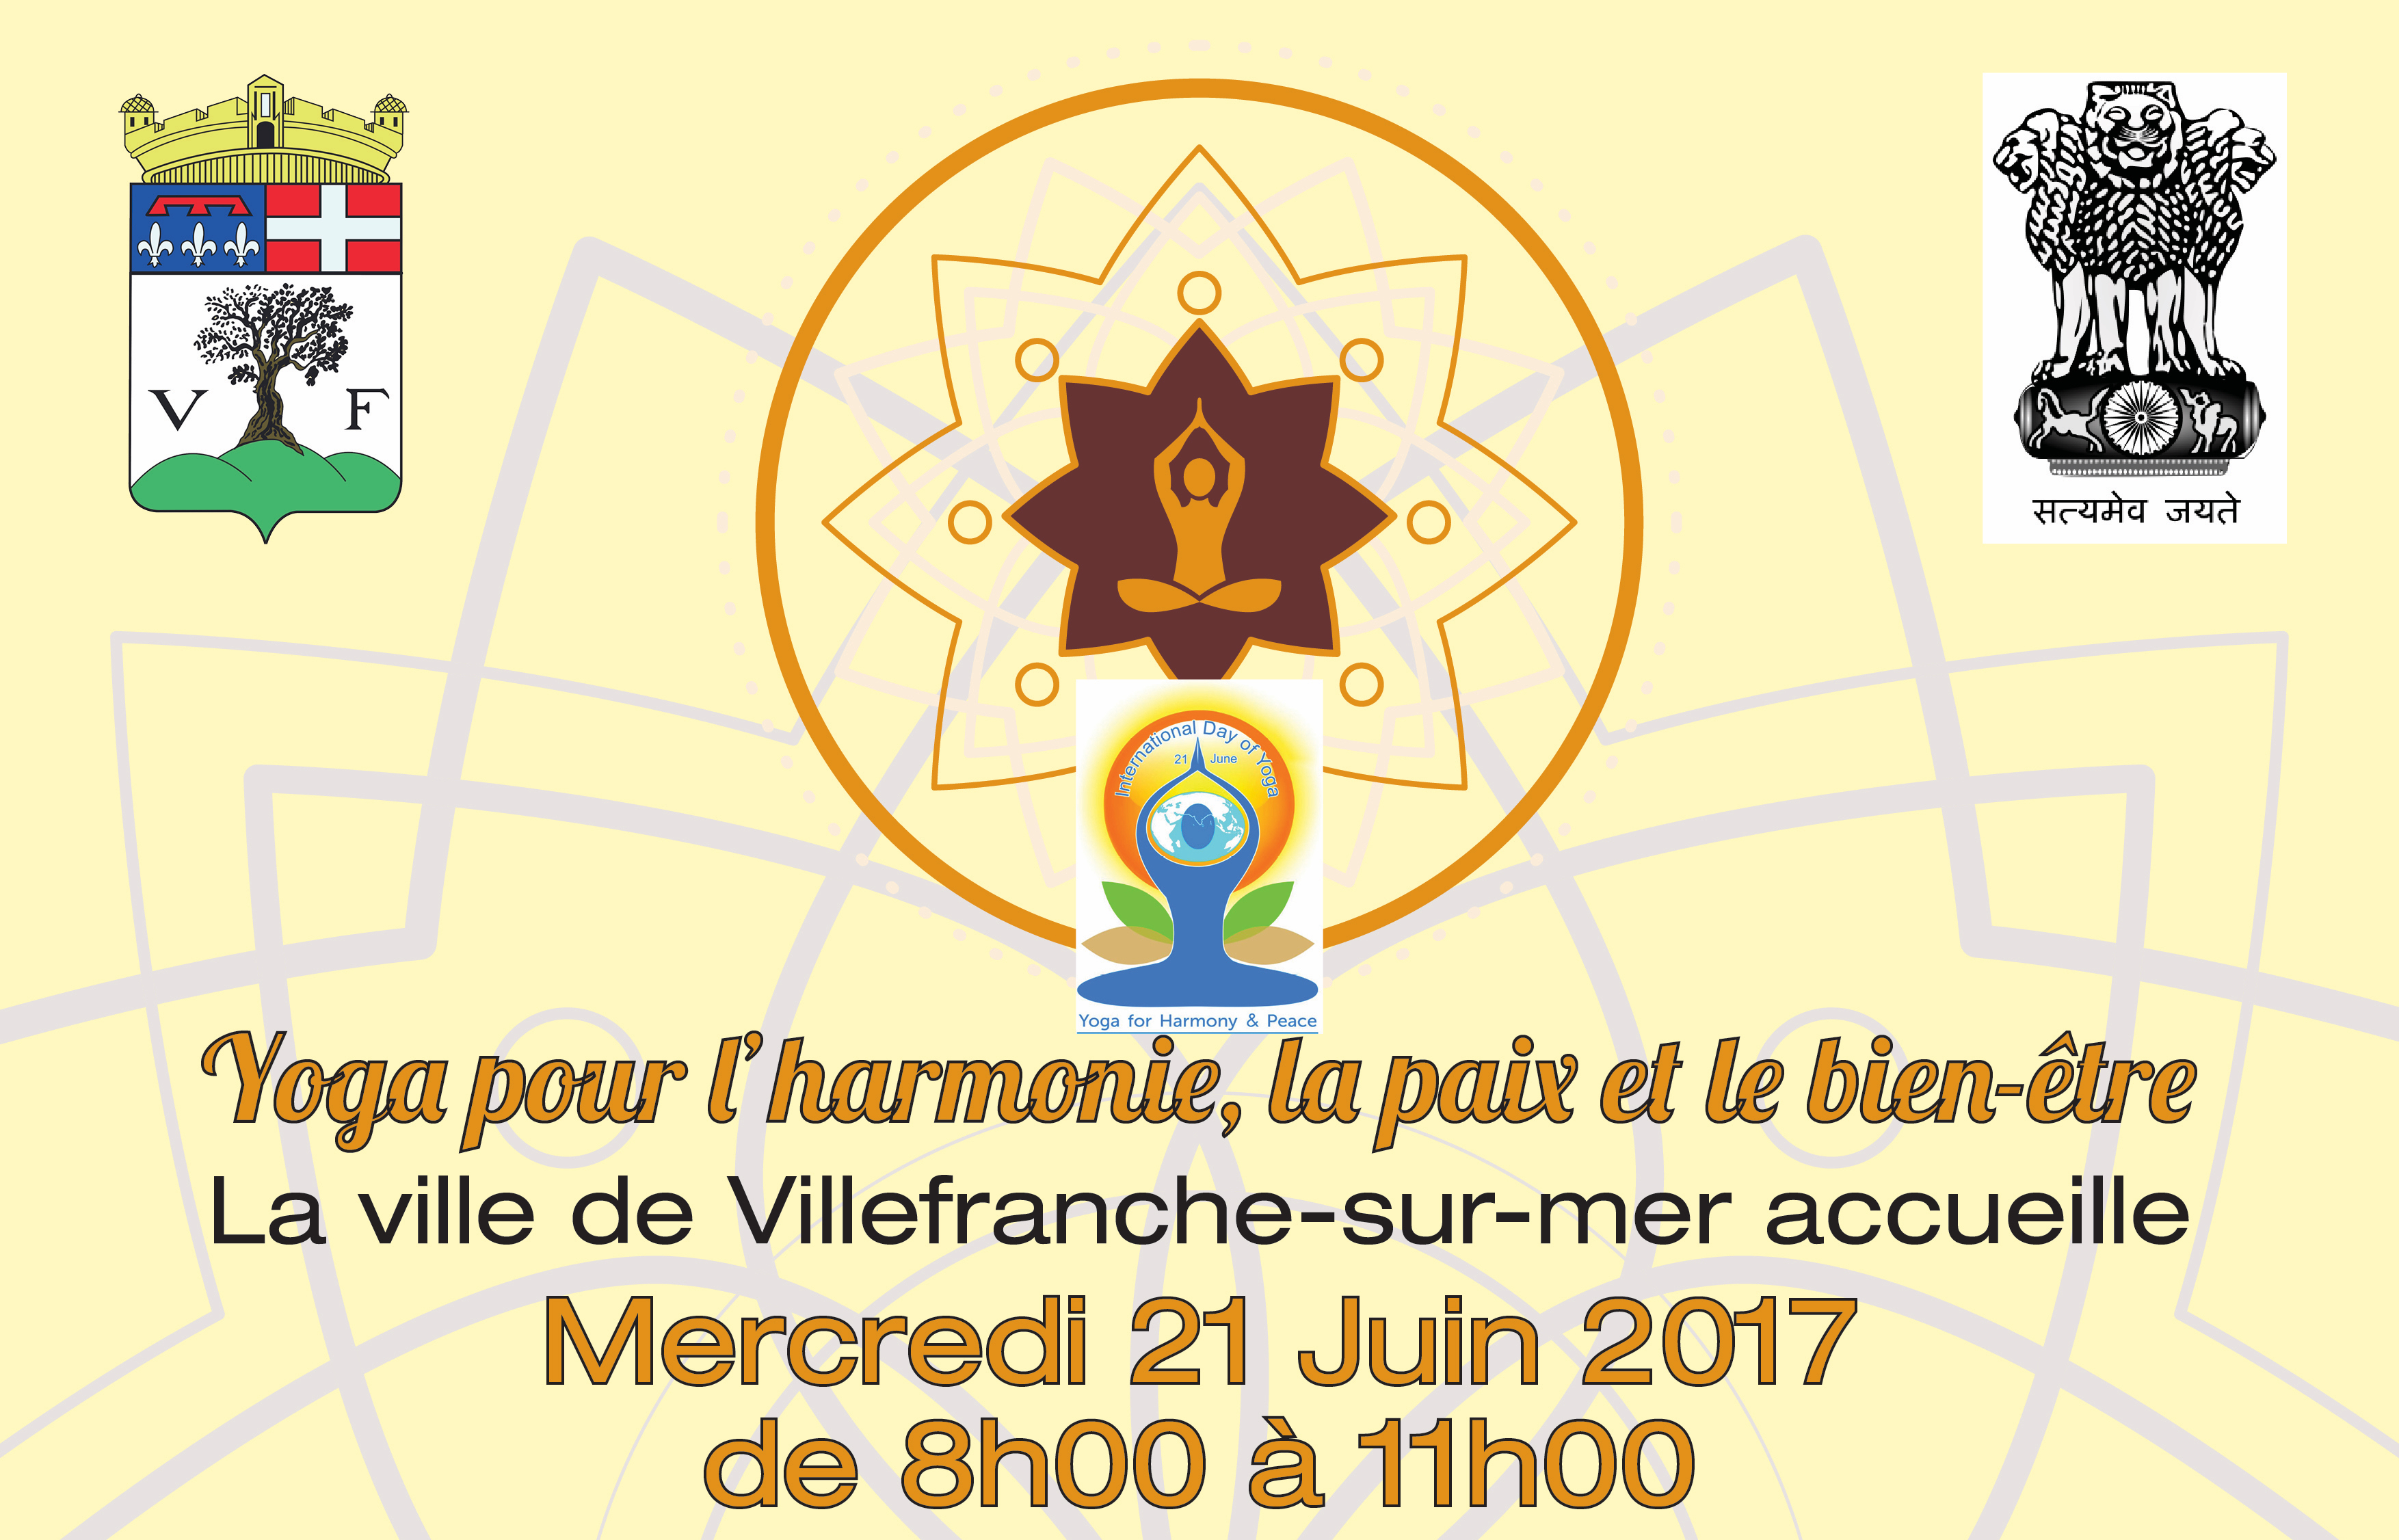 You are currently viewing International Yoga Day in Villefranche-sur-Mer on June 21st